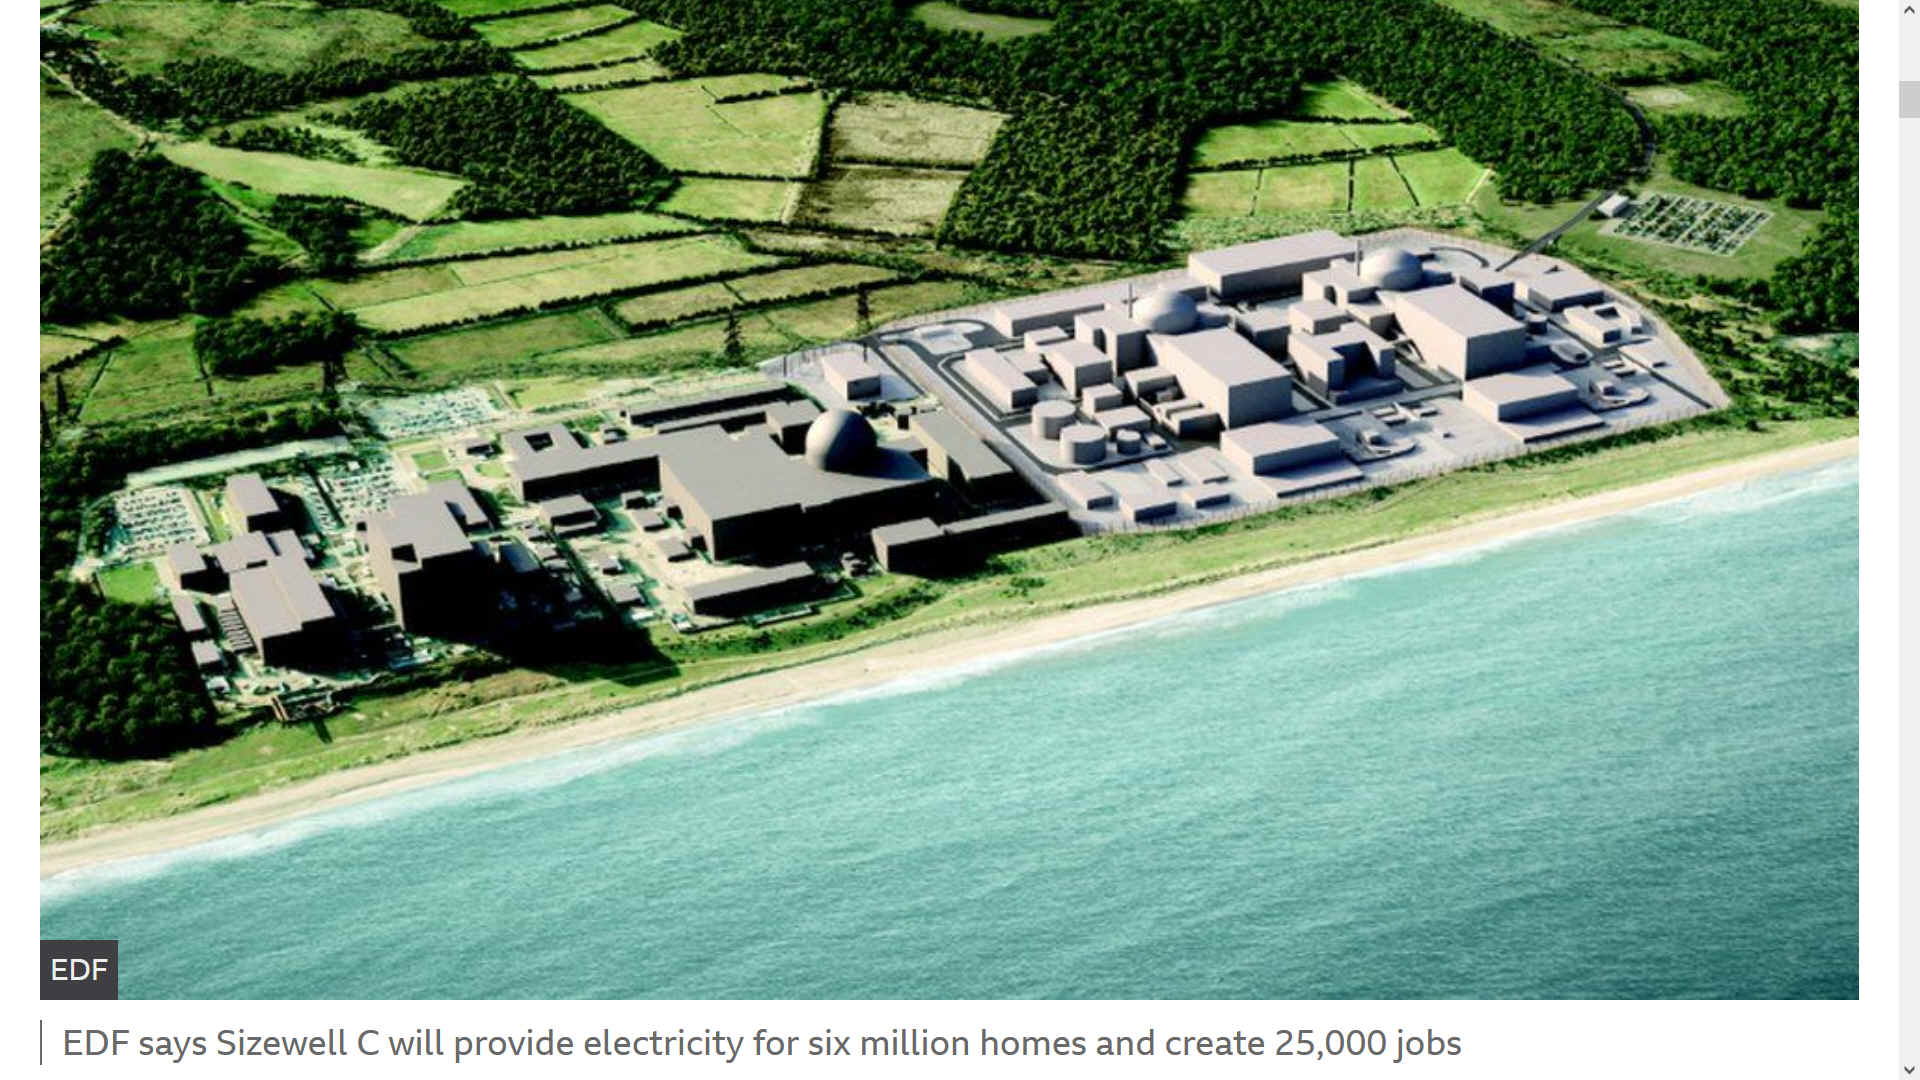 Sizewell C artists impression, proposed nuclear power station